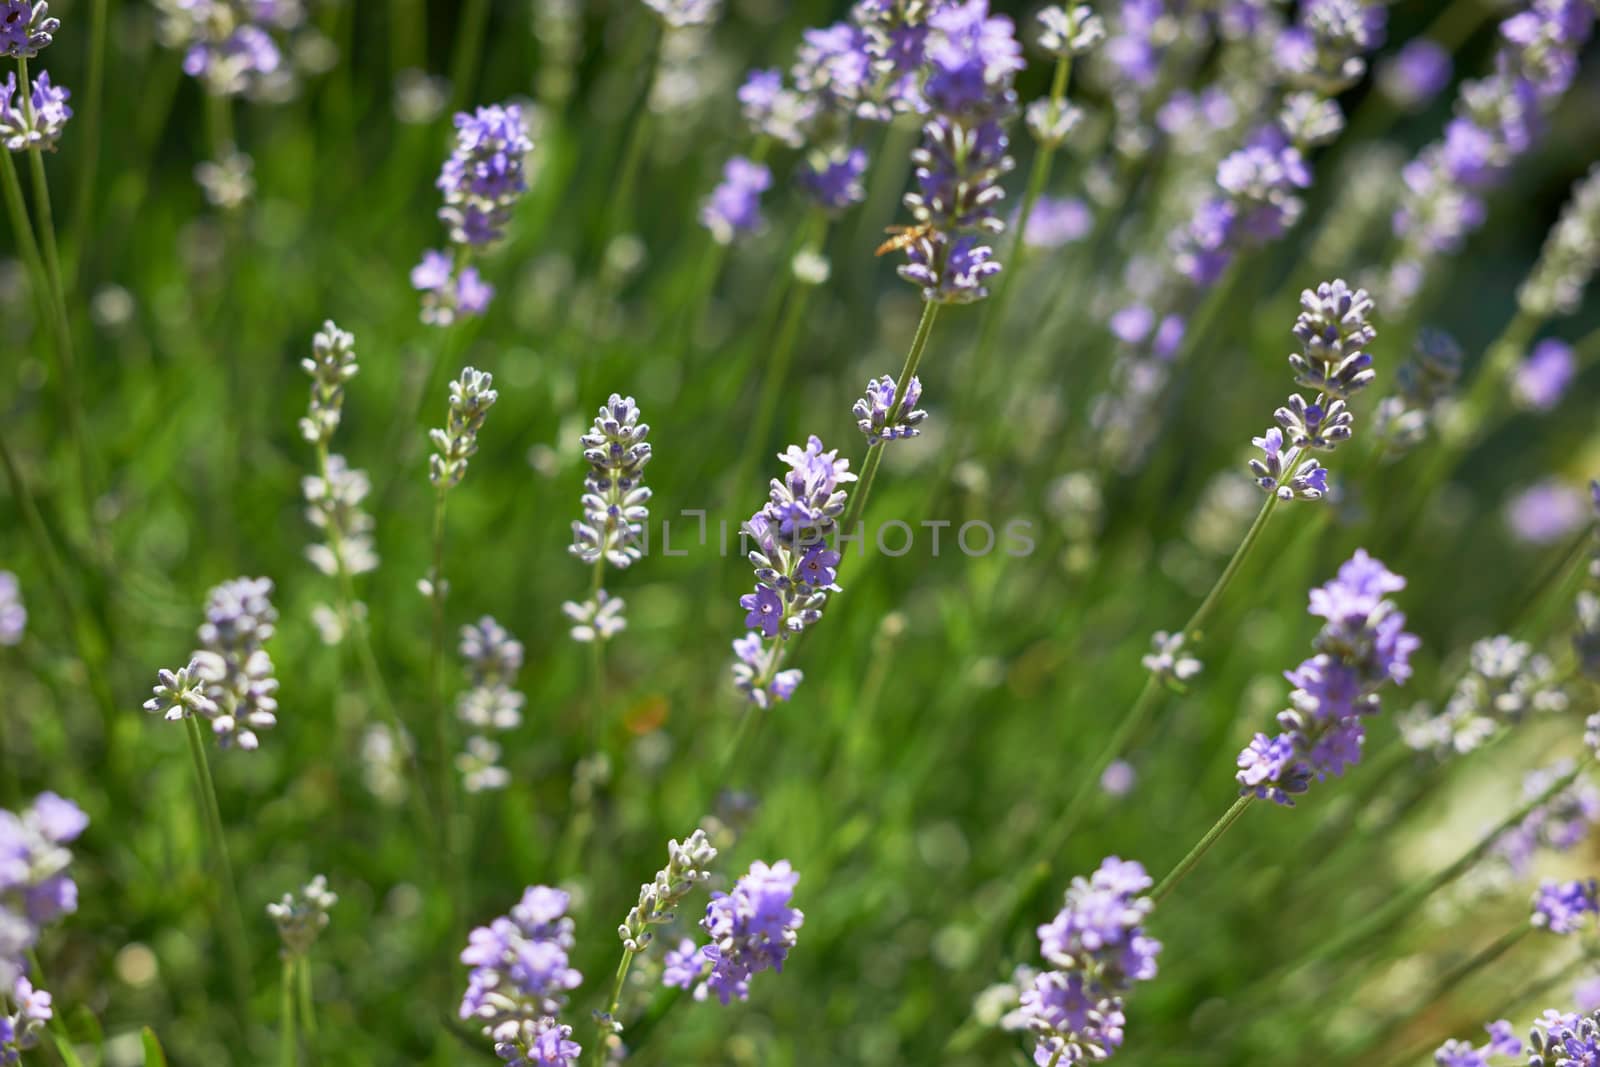 Lavender by ecobo